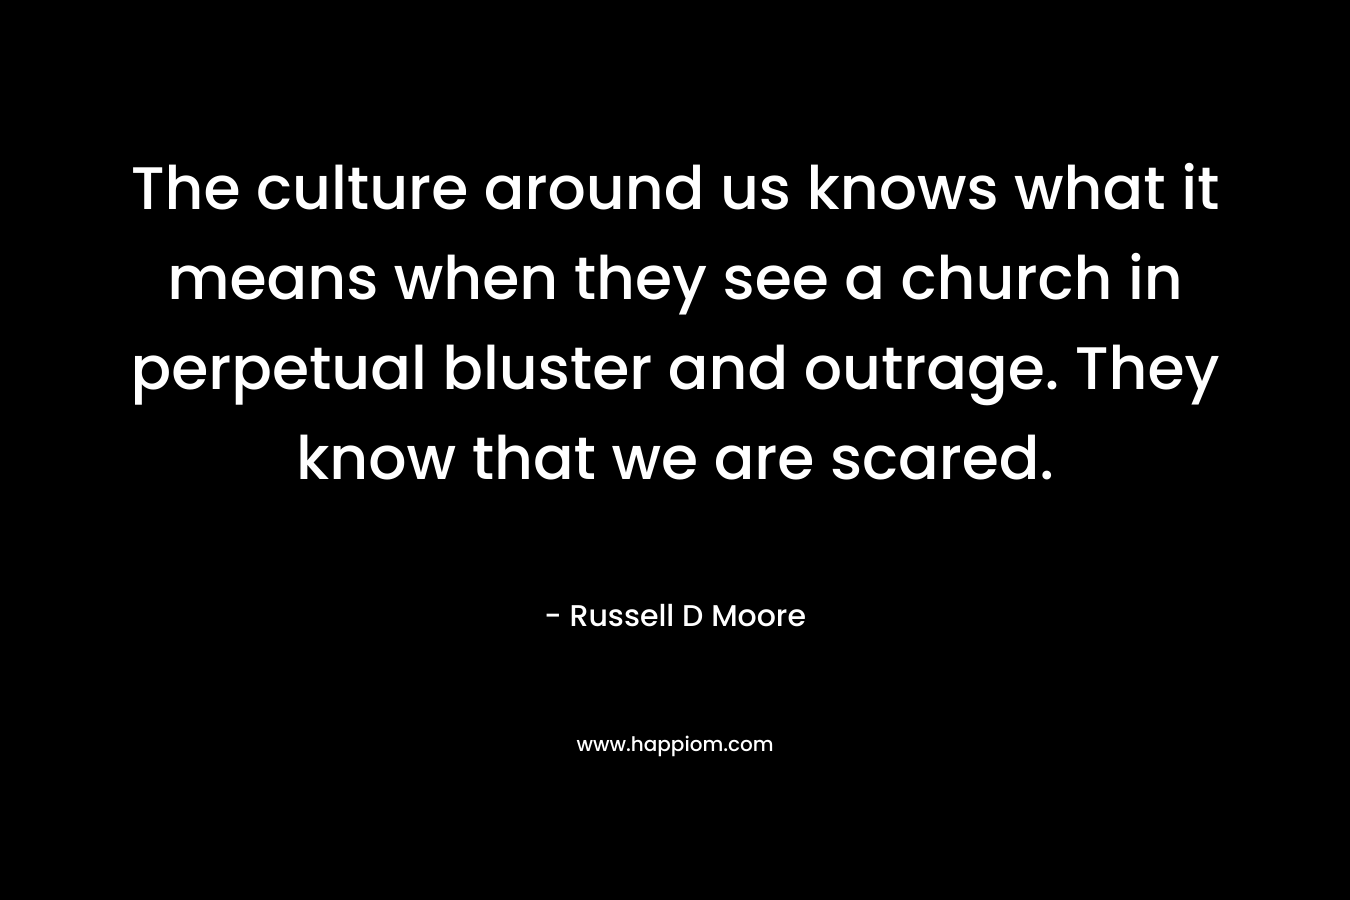 The culture around us knows what it means when they see a church in perpetual bluster and outrage. They know that we are scared. – Russell D Moore